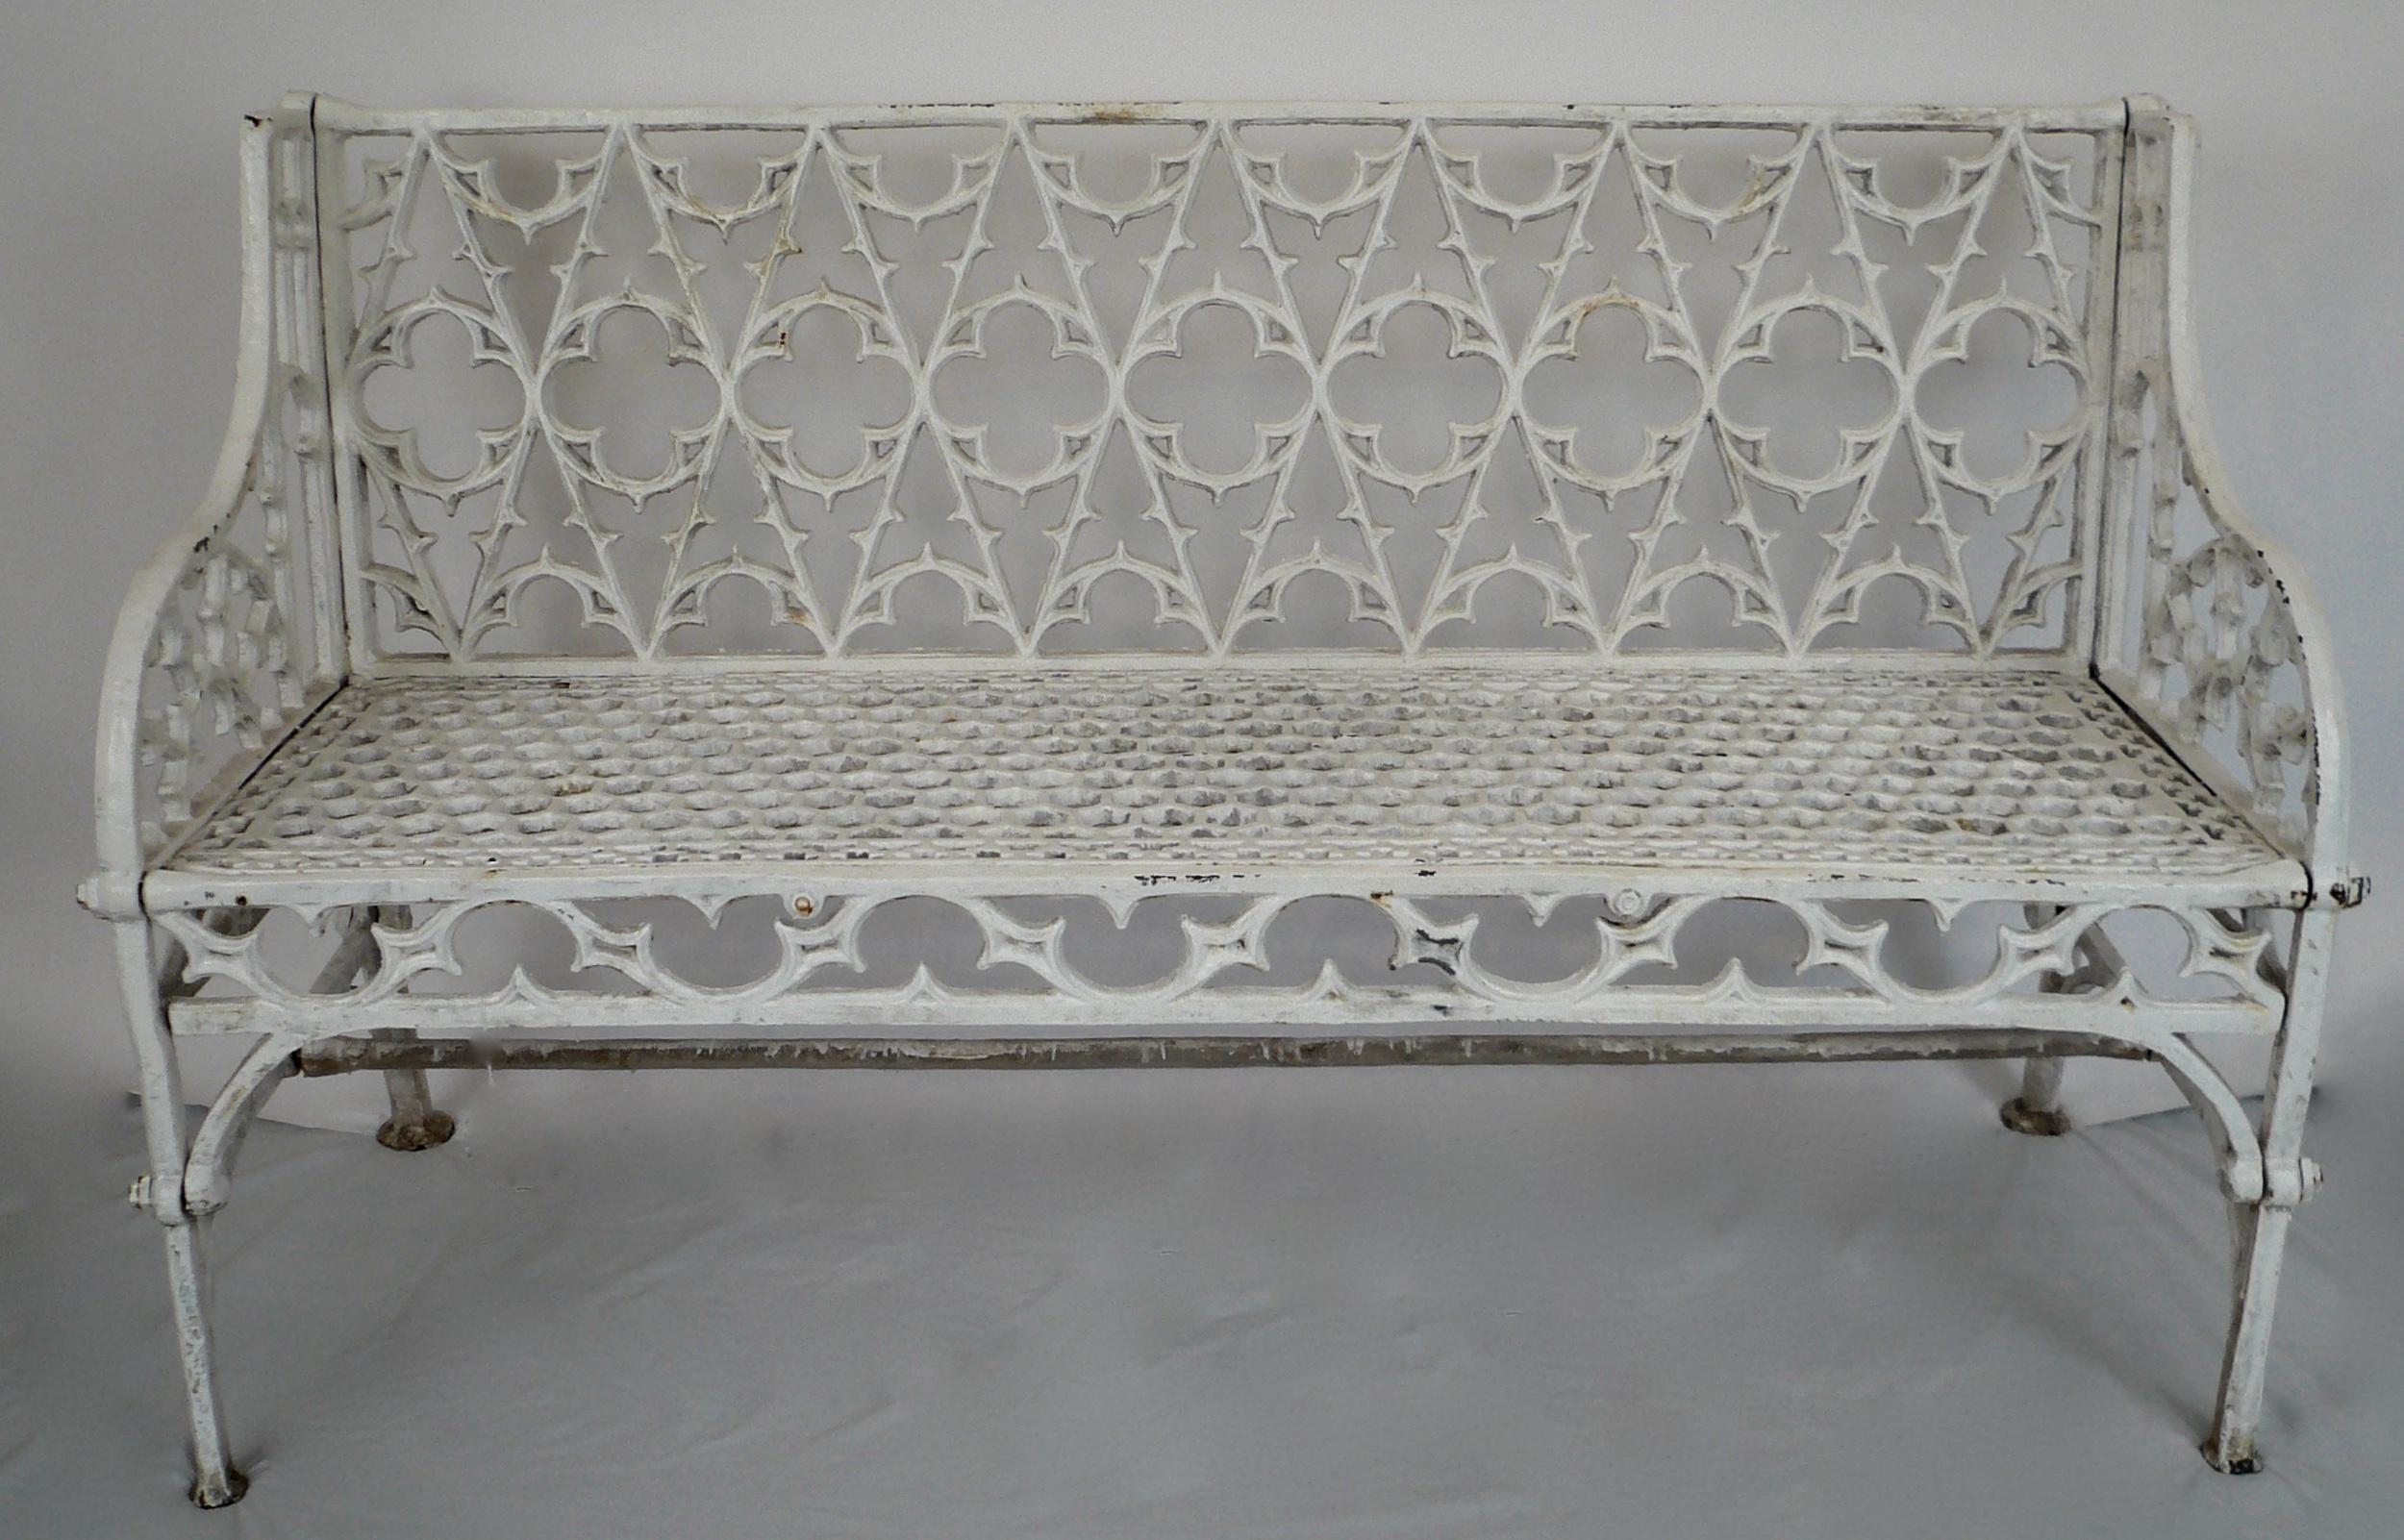 This elegant pair of 'Gothick' style garden seats are heavily cast, and feature an open quatrefoil pattern back.